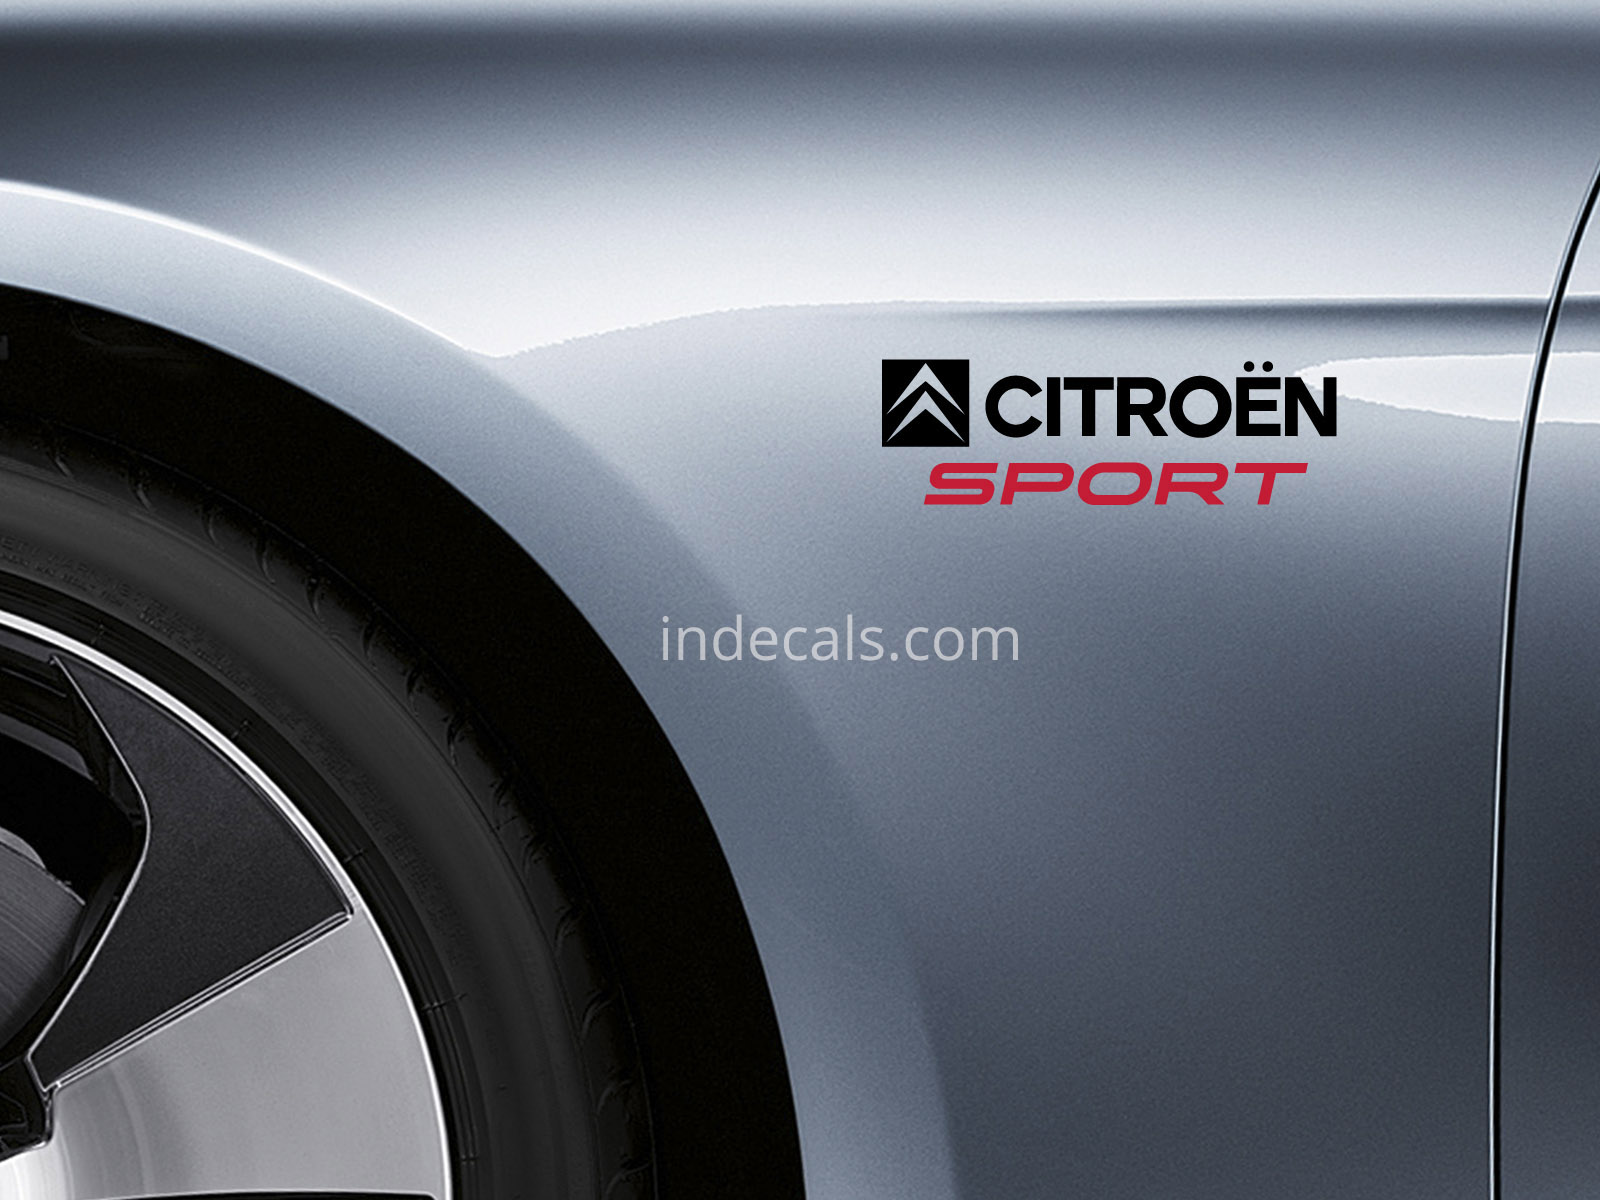 2 x Citroen Sports stickers for Wings - Black & Red